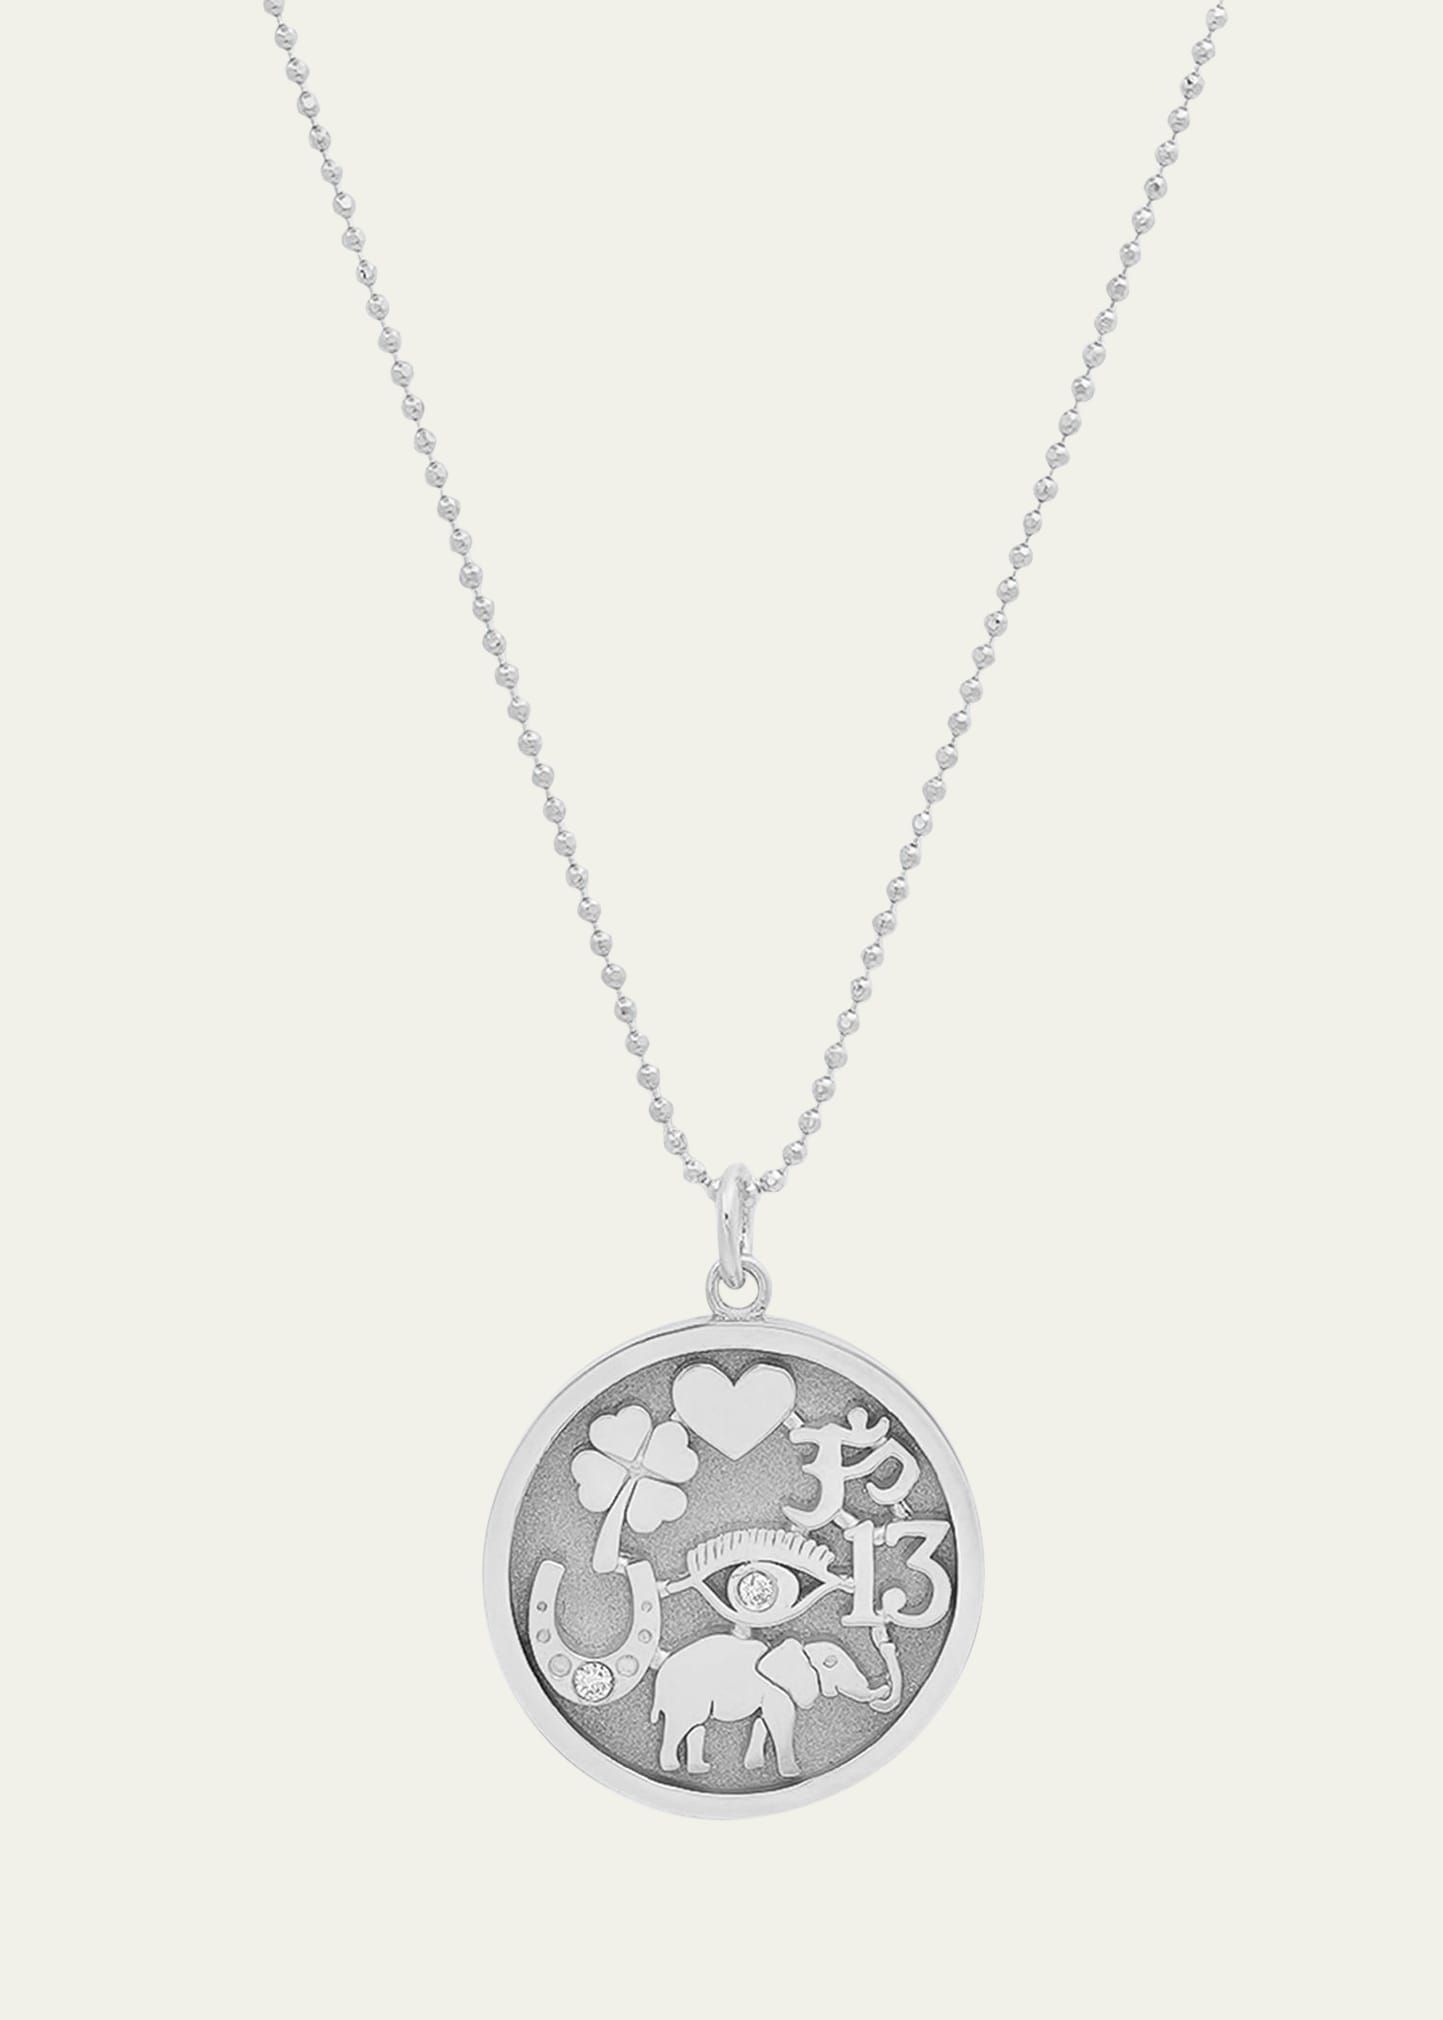 18k White Gold Good Luck Pendant Necklace with Diamonds